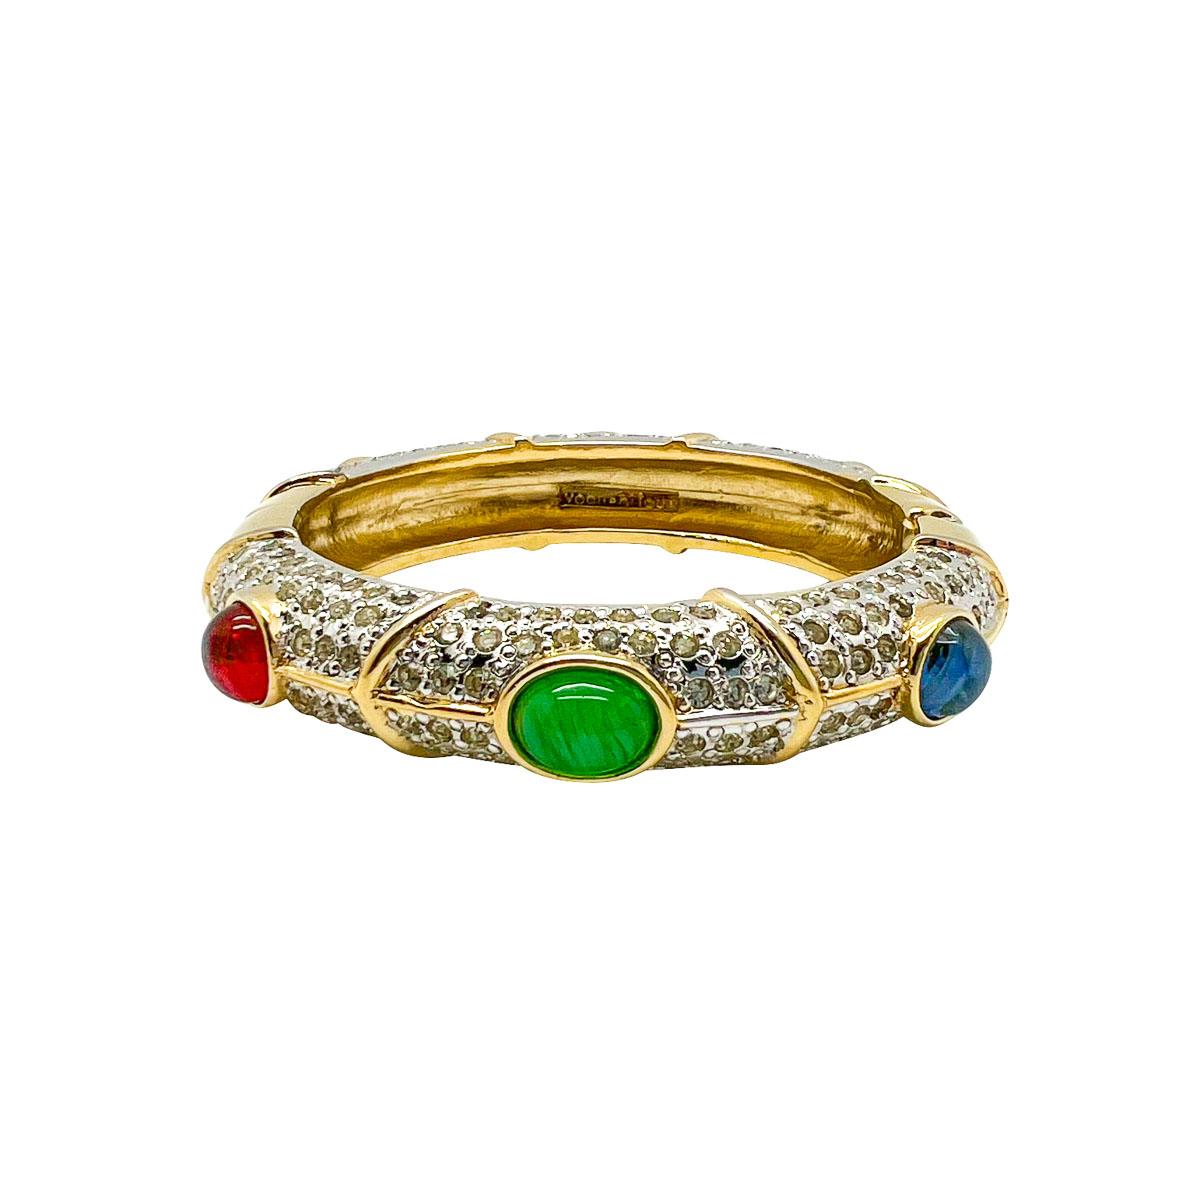 A dreamy Vintage Vogue Bijoux Jewelled Cuff. Emulating a pave set diamond bangle set with emerald, ruby, and sapphire glass cabochon stones this is a seriously glamorous finishing touch.
The Italian jewellery brand Vogue Bijoux spans about four